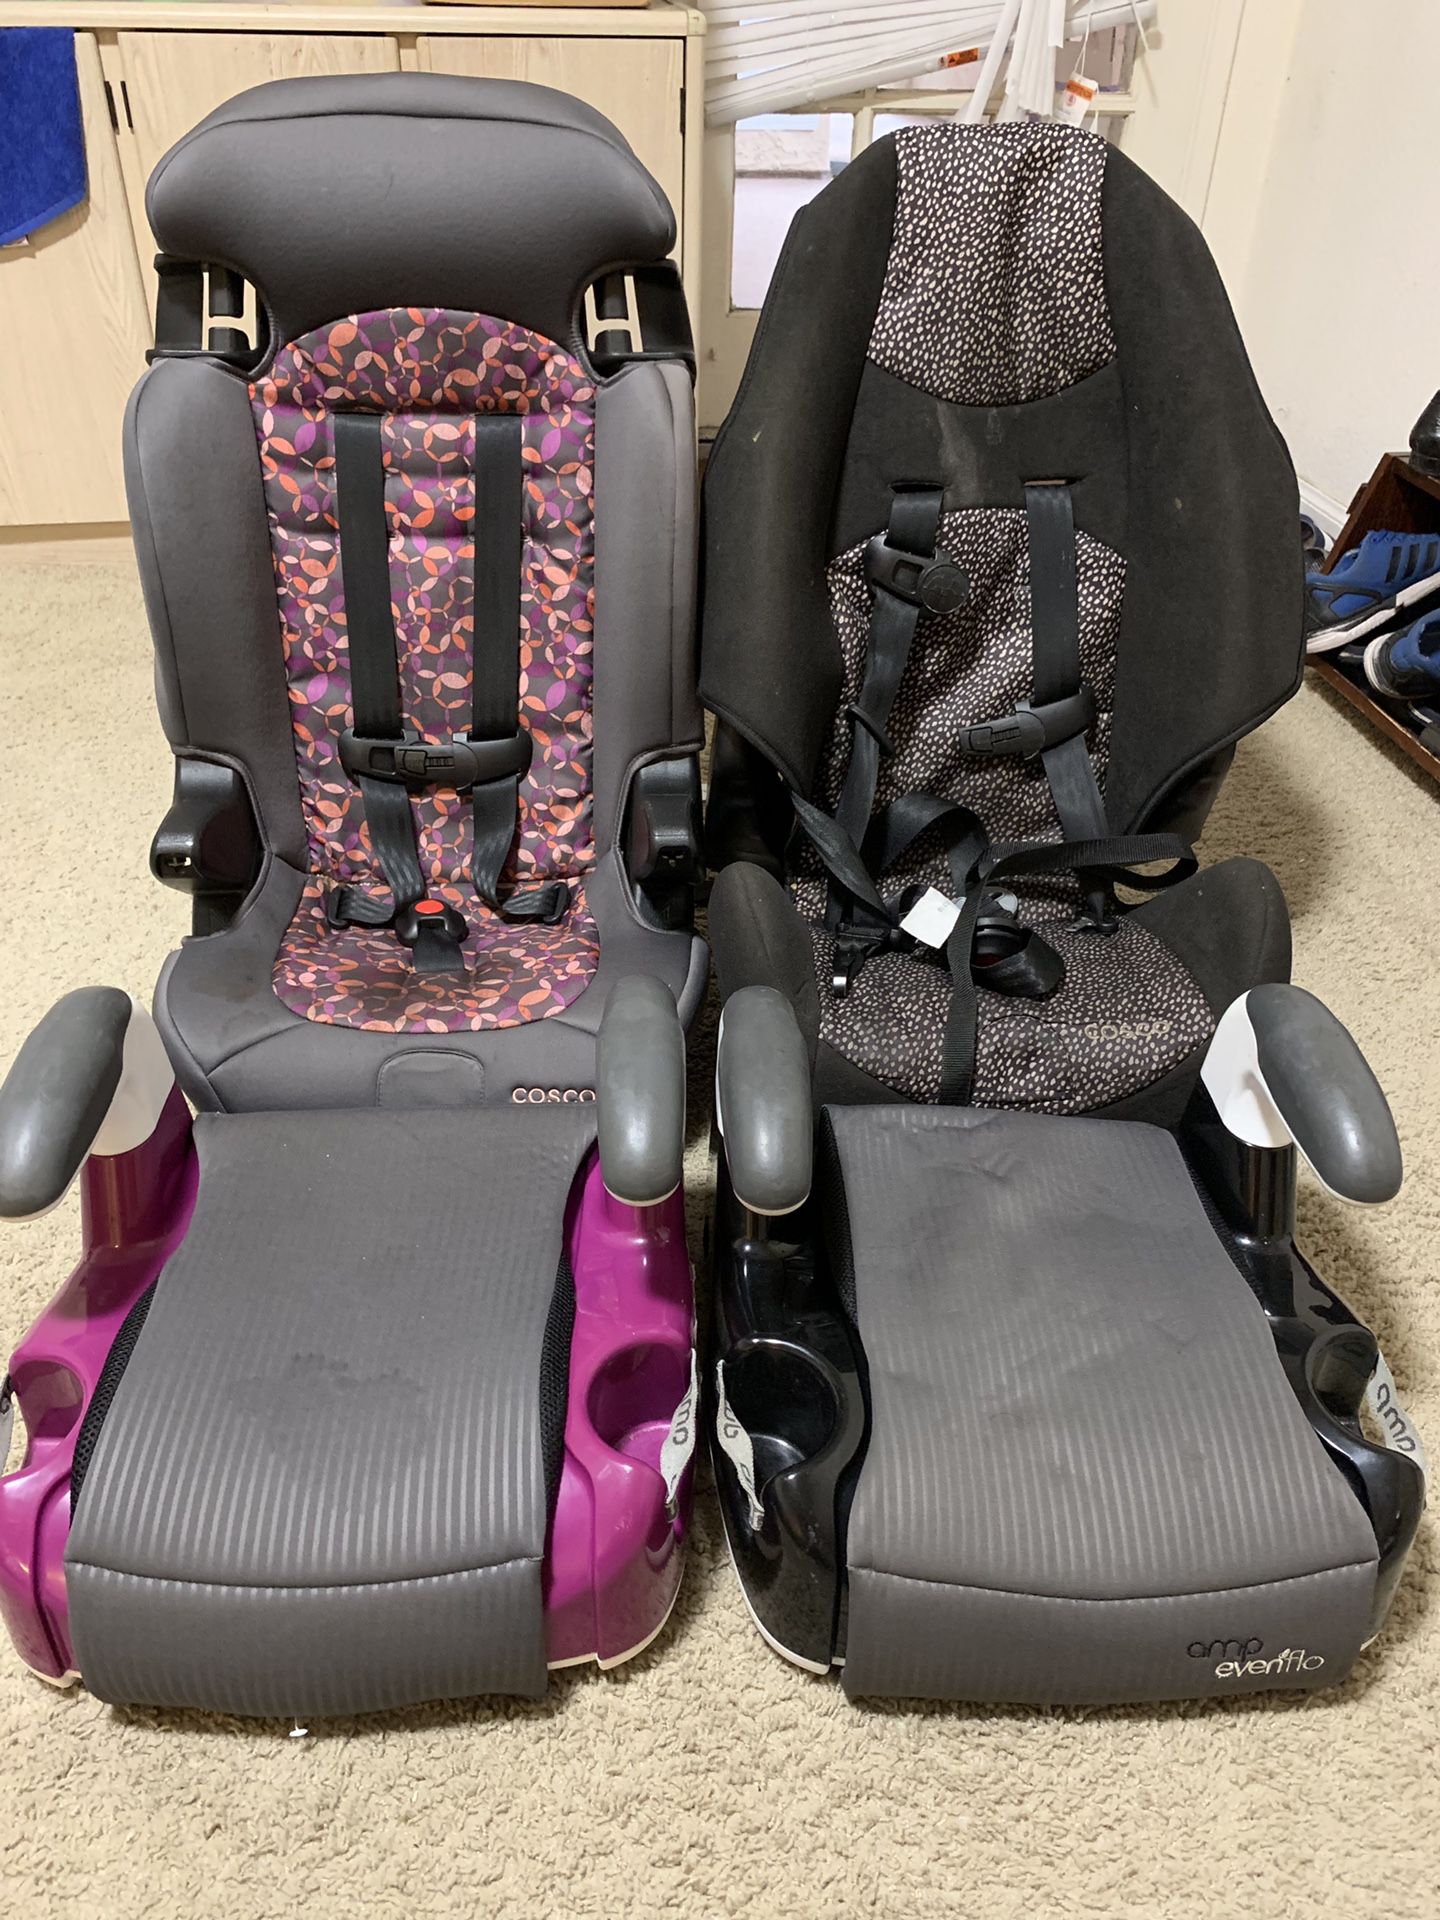 2 car seats and 2 boosters for 10$